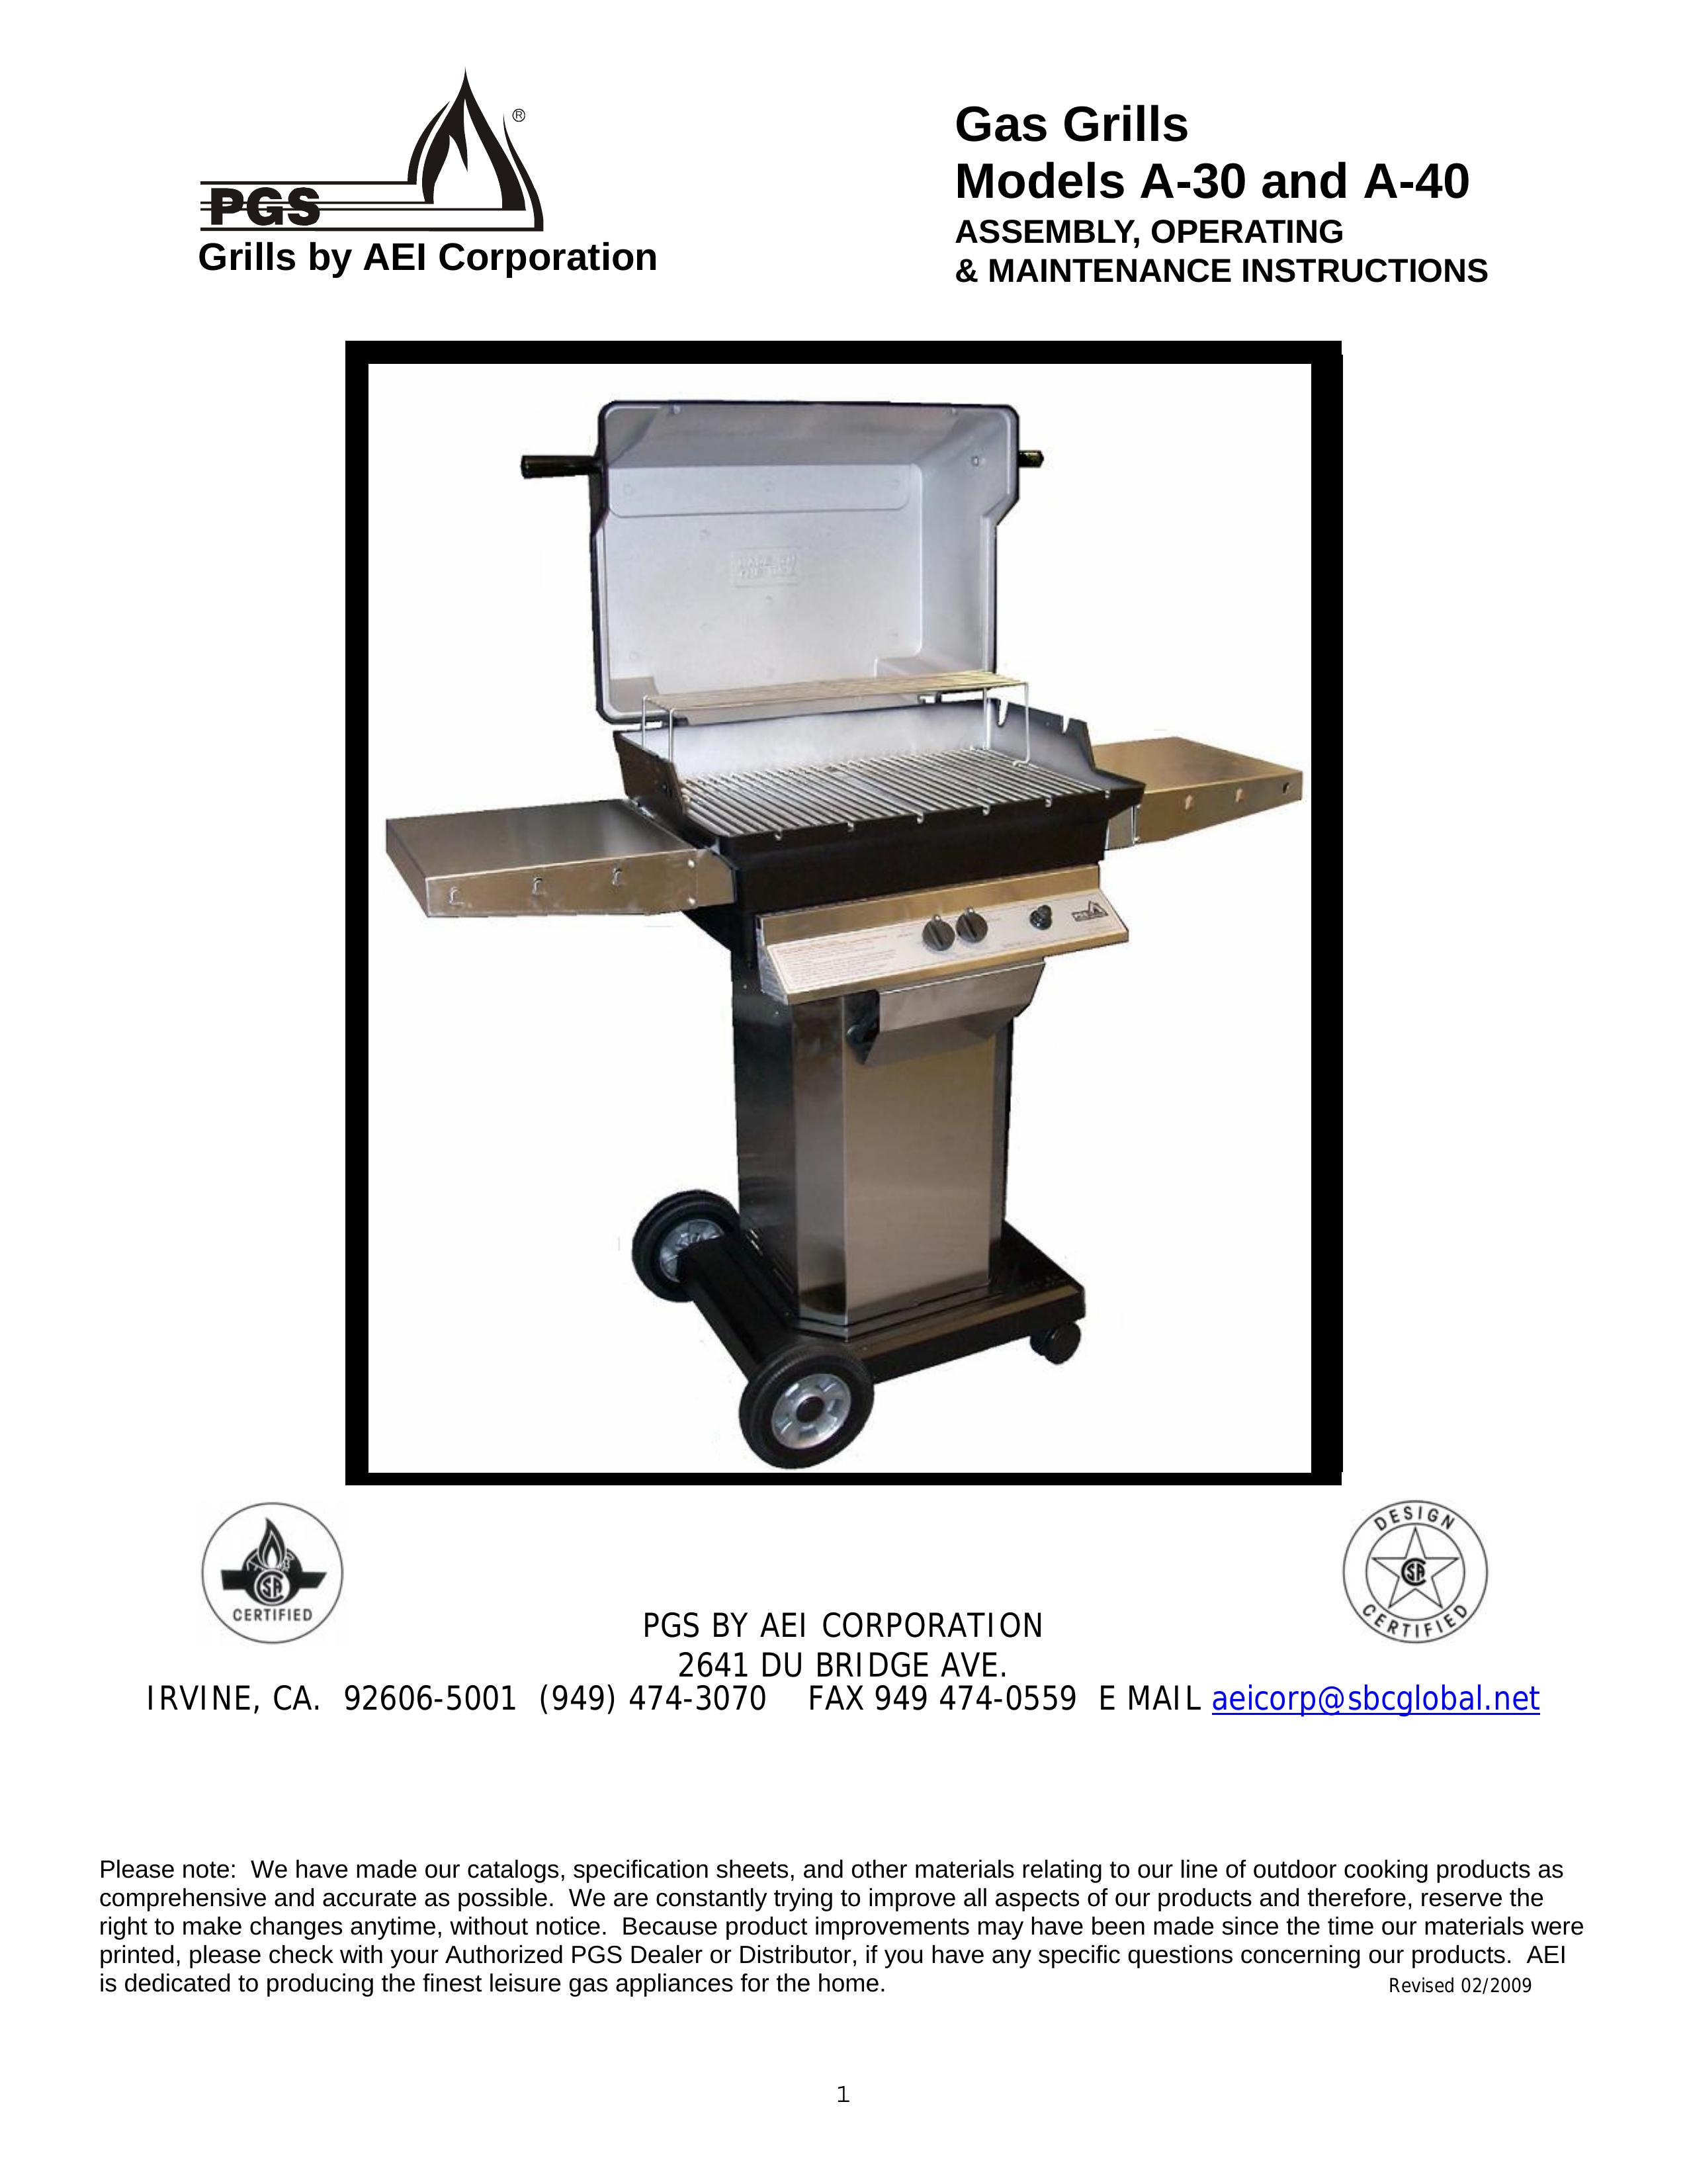 PGS A-30 Gas Grill User Manual